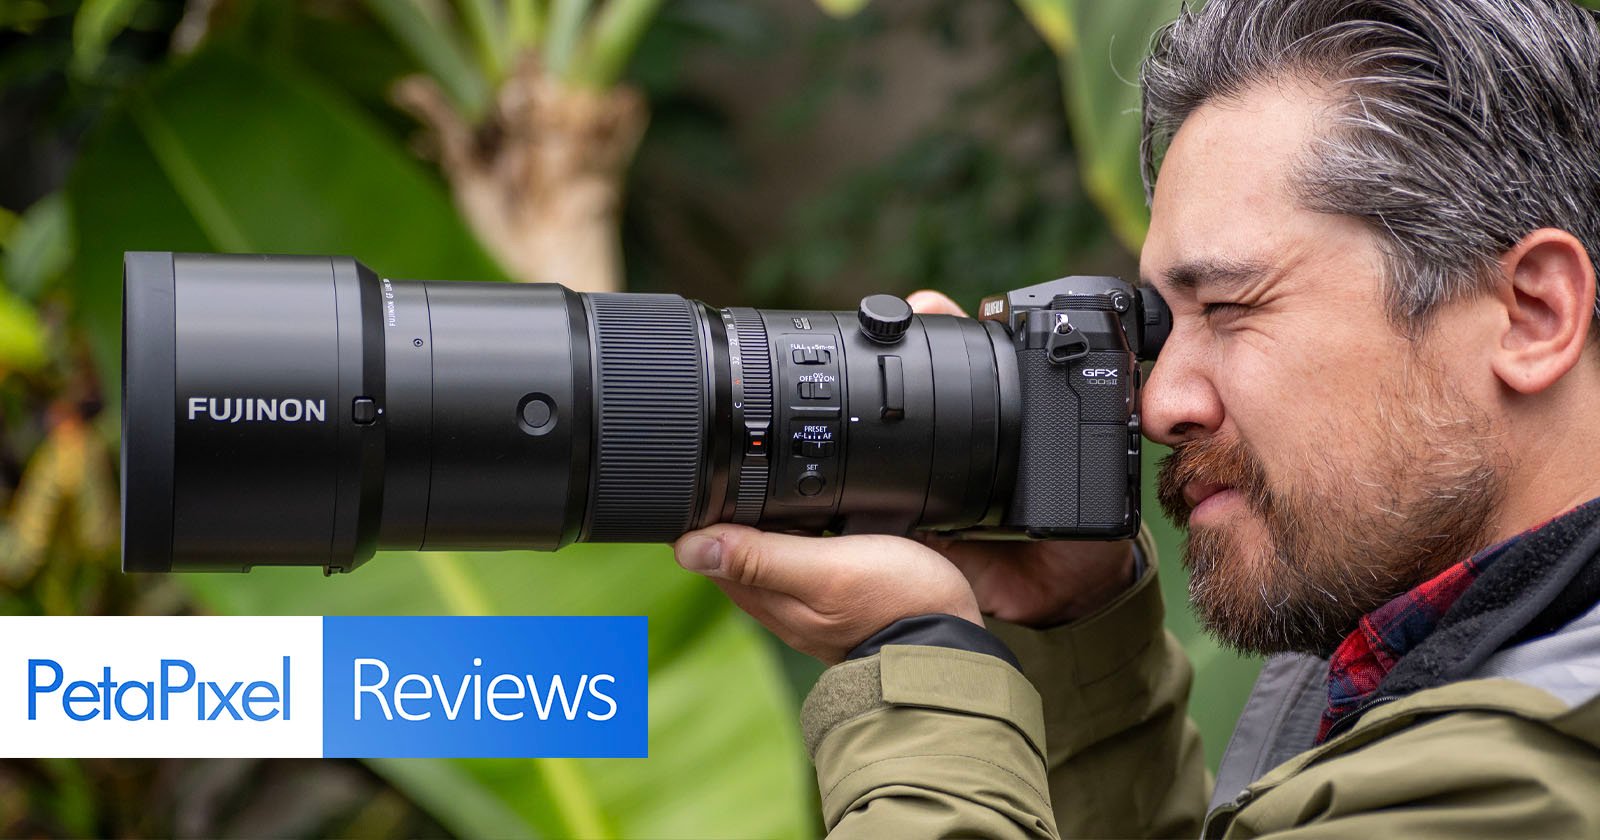 A person with gray hair and a beard is looking through the viewfinder of a camera with a large Fujinon lens. The setting appears to be outdoors with green foliage in the background. The image includes the text PetaPixel Reviews in the bottom left corner.